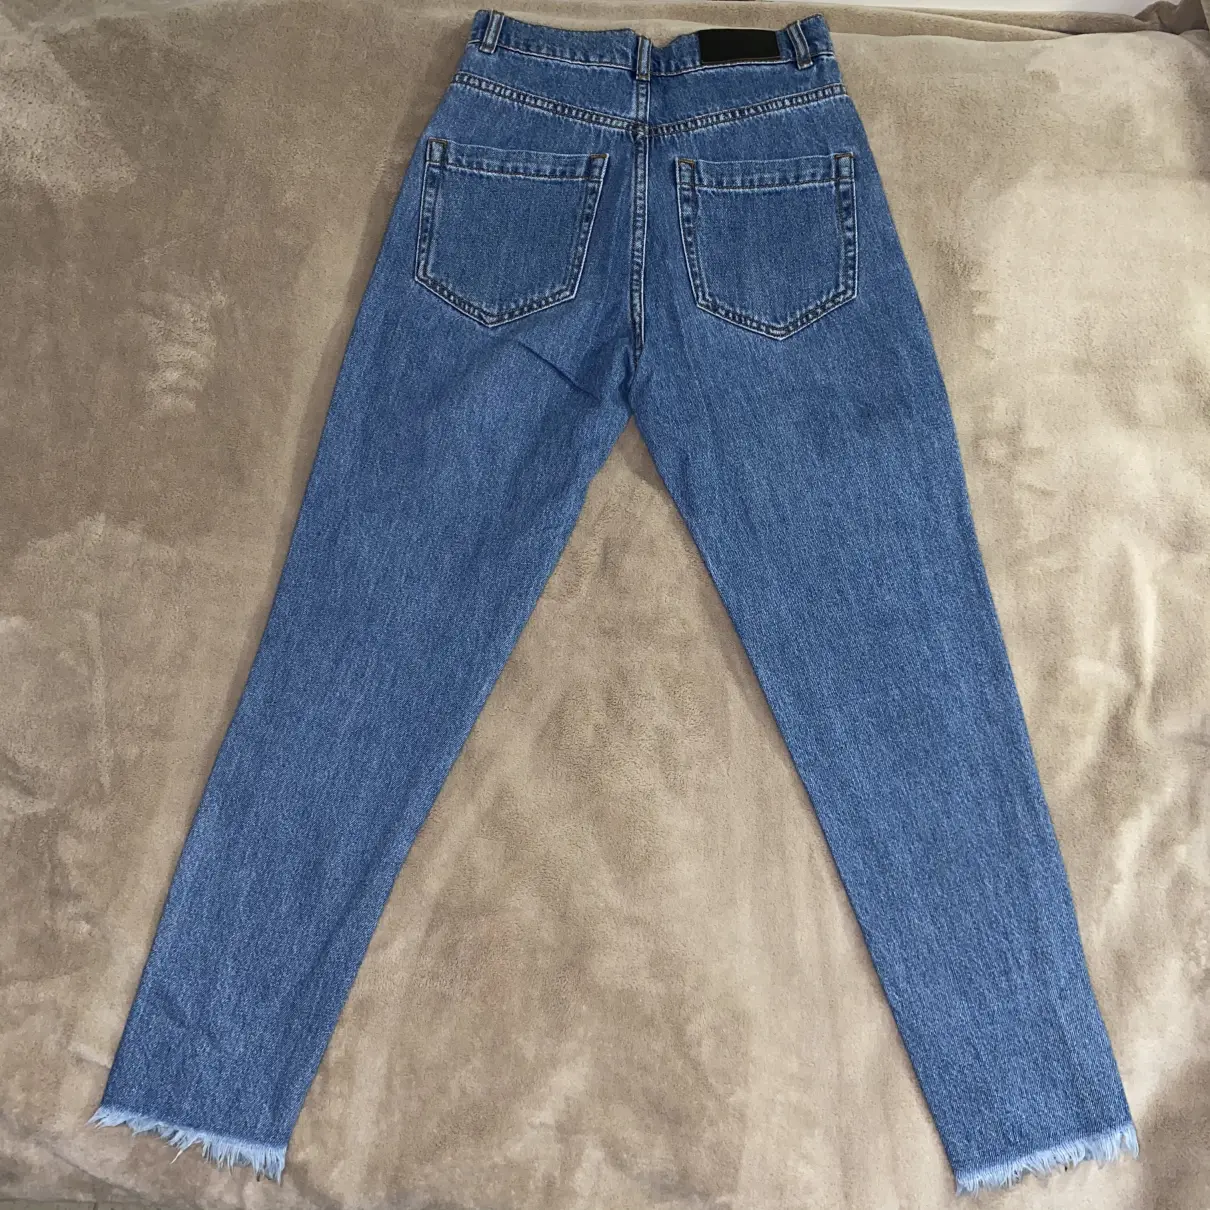 Buy Whistles Blue Cotton Jeans online